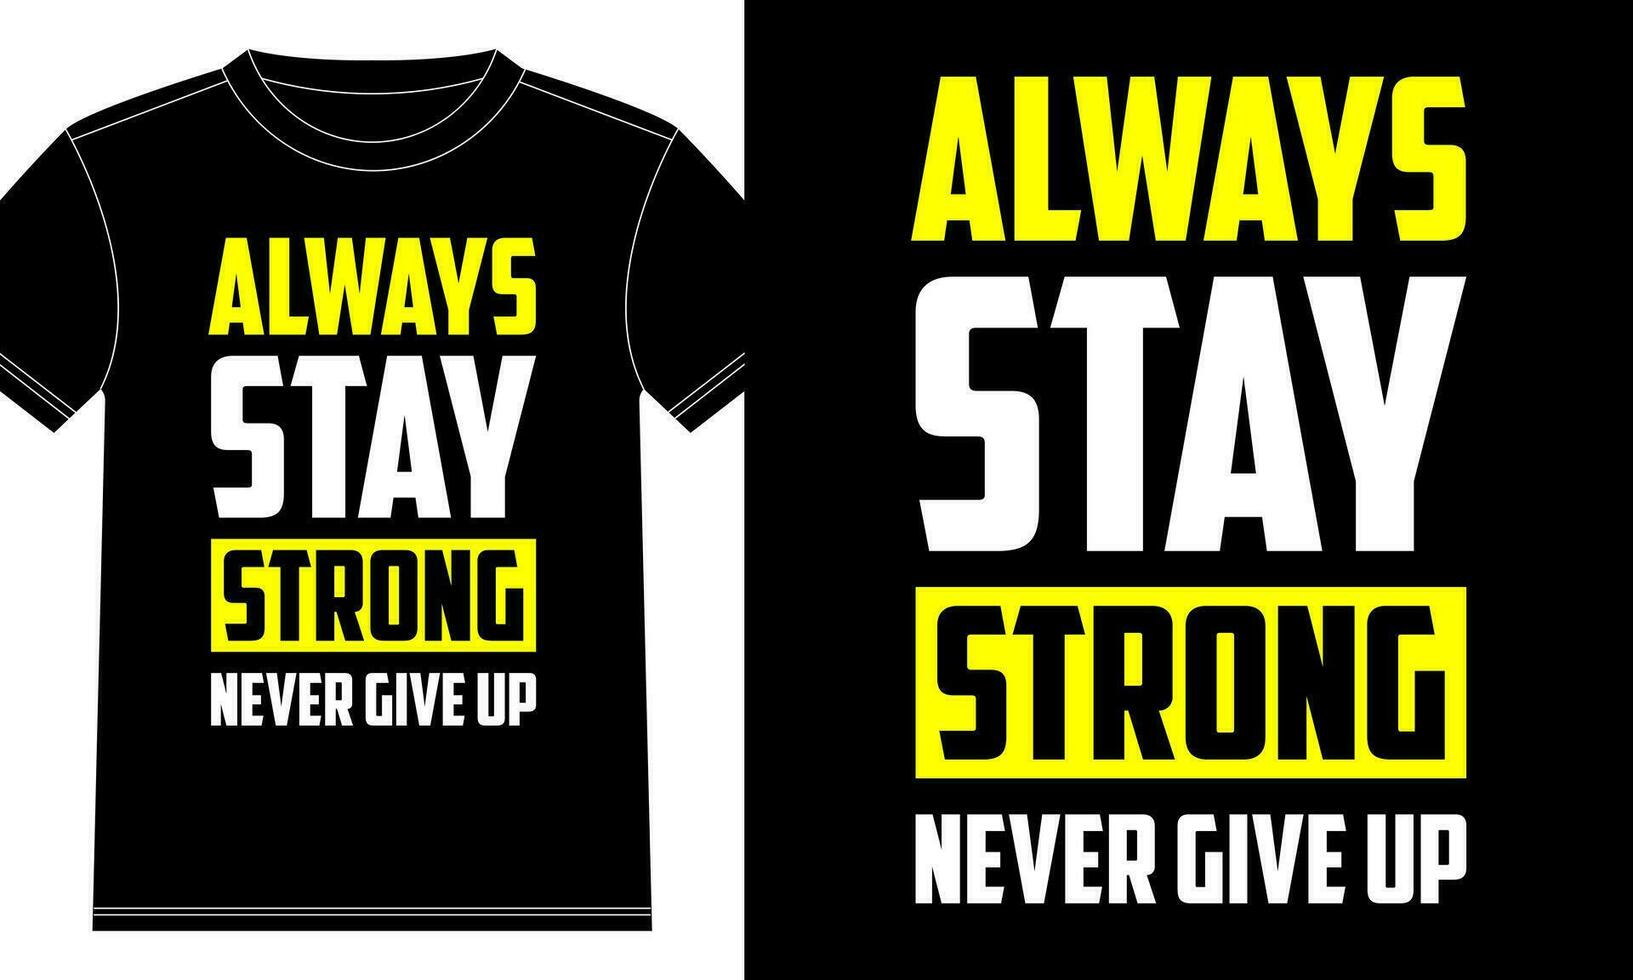 Always stay strong Typography Tshirt design vector